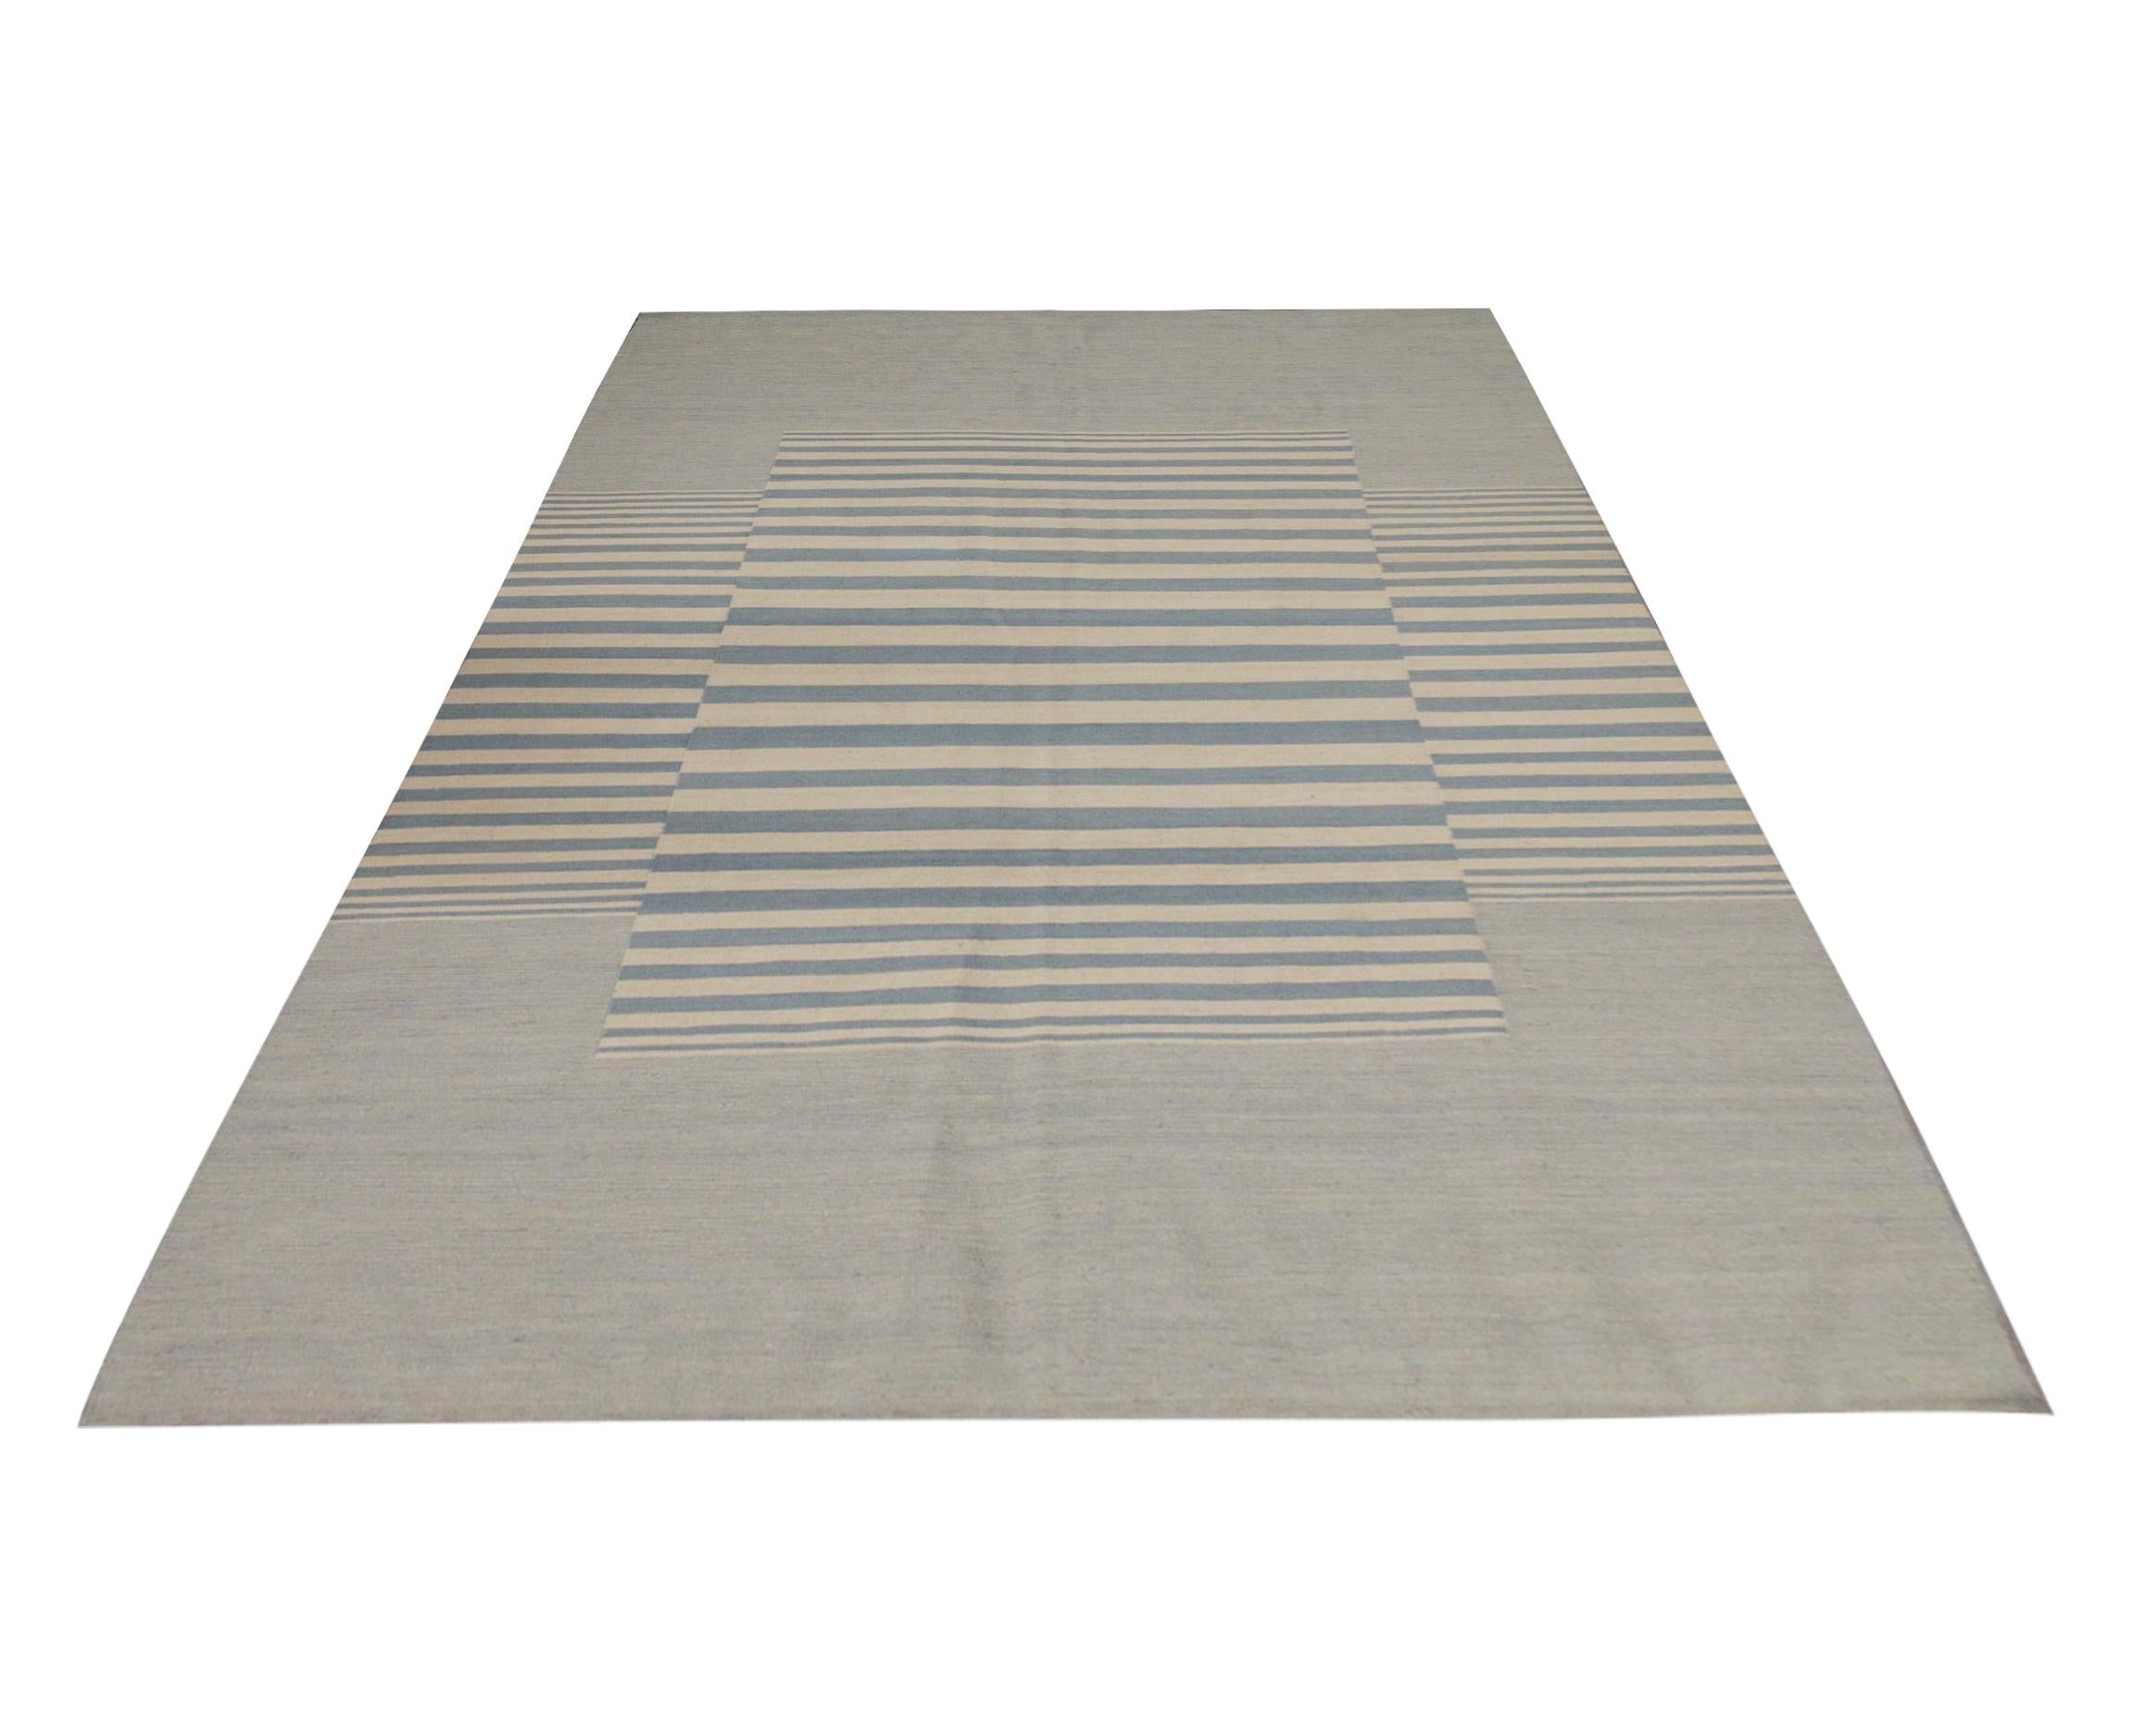 This modern flatwoven kilim is a handwoven piece constructed in Afghanistan. The design is woven with a bold stripe pattern with a simple blue and cream Scandinavian colour palette. This fine wool kilim is simple yet elegant, enhancing modern and